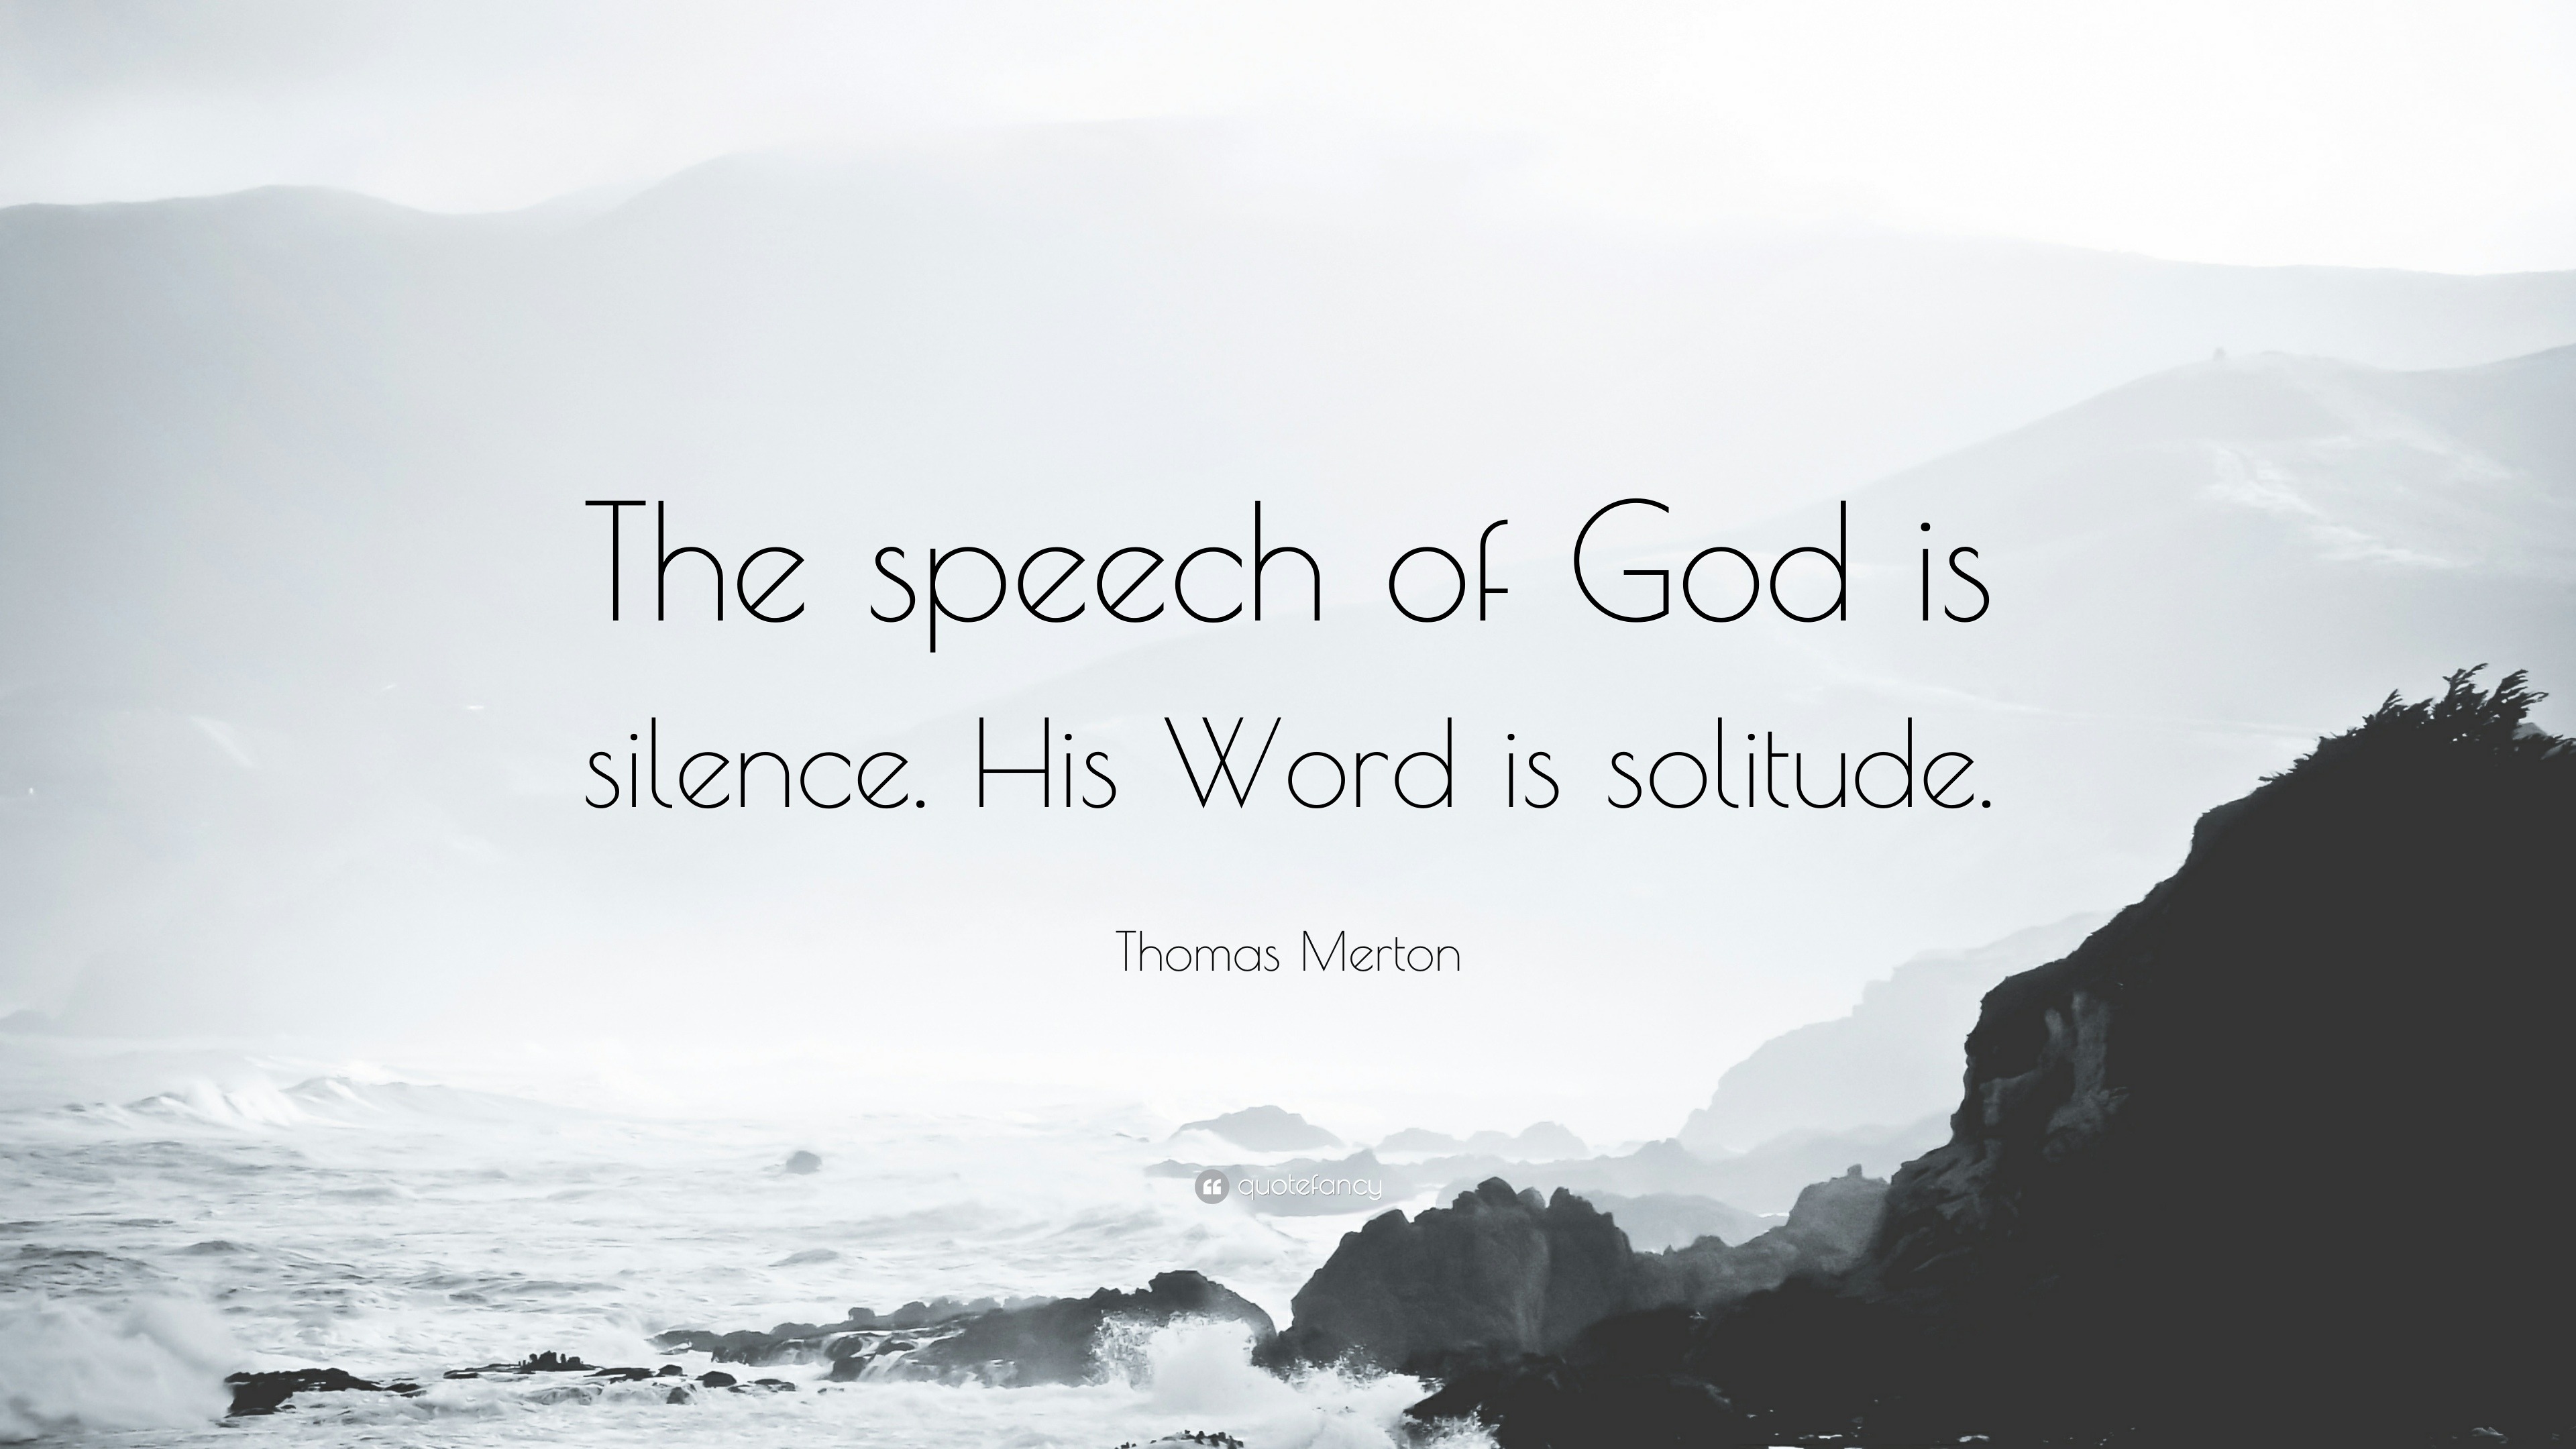 1956735 Thomas Merton Quote The speech of God is silence His Word is